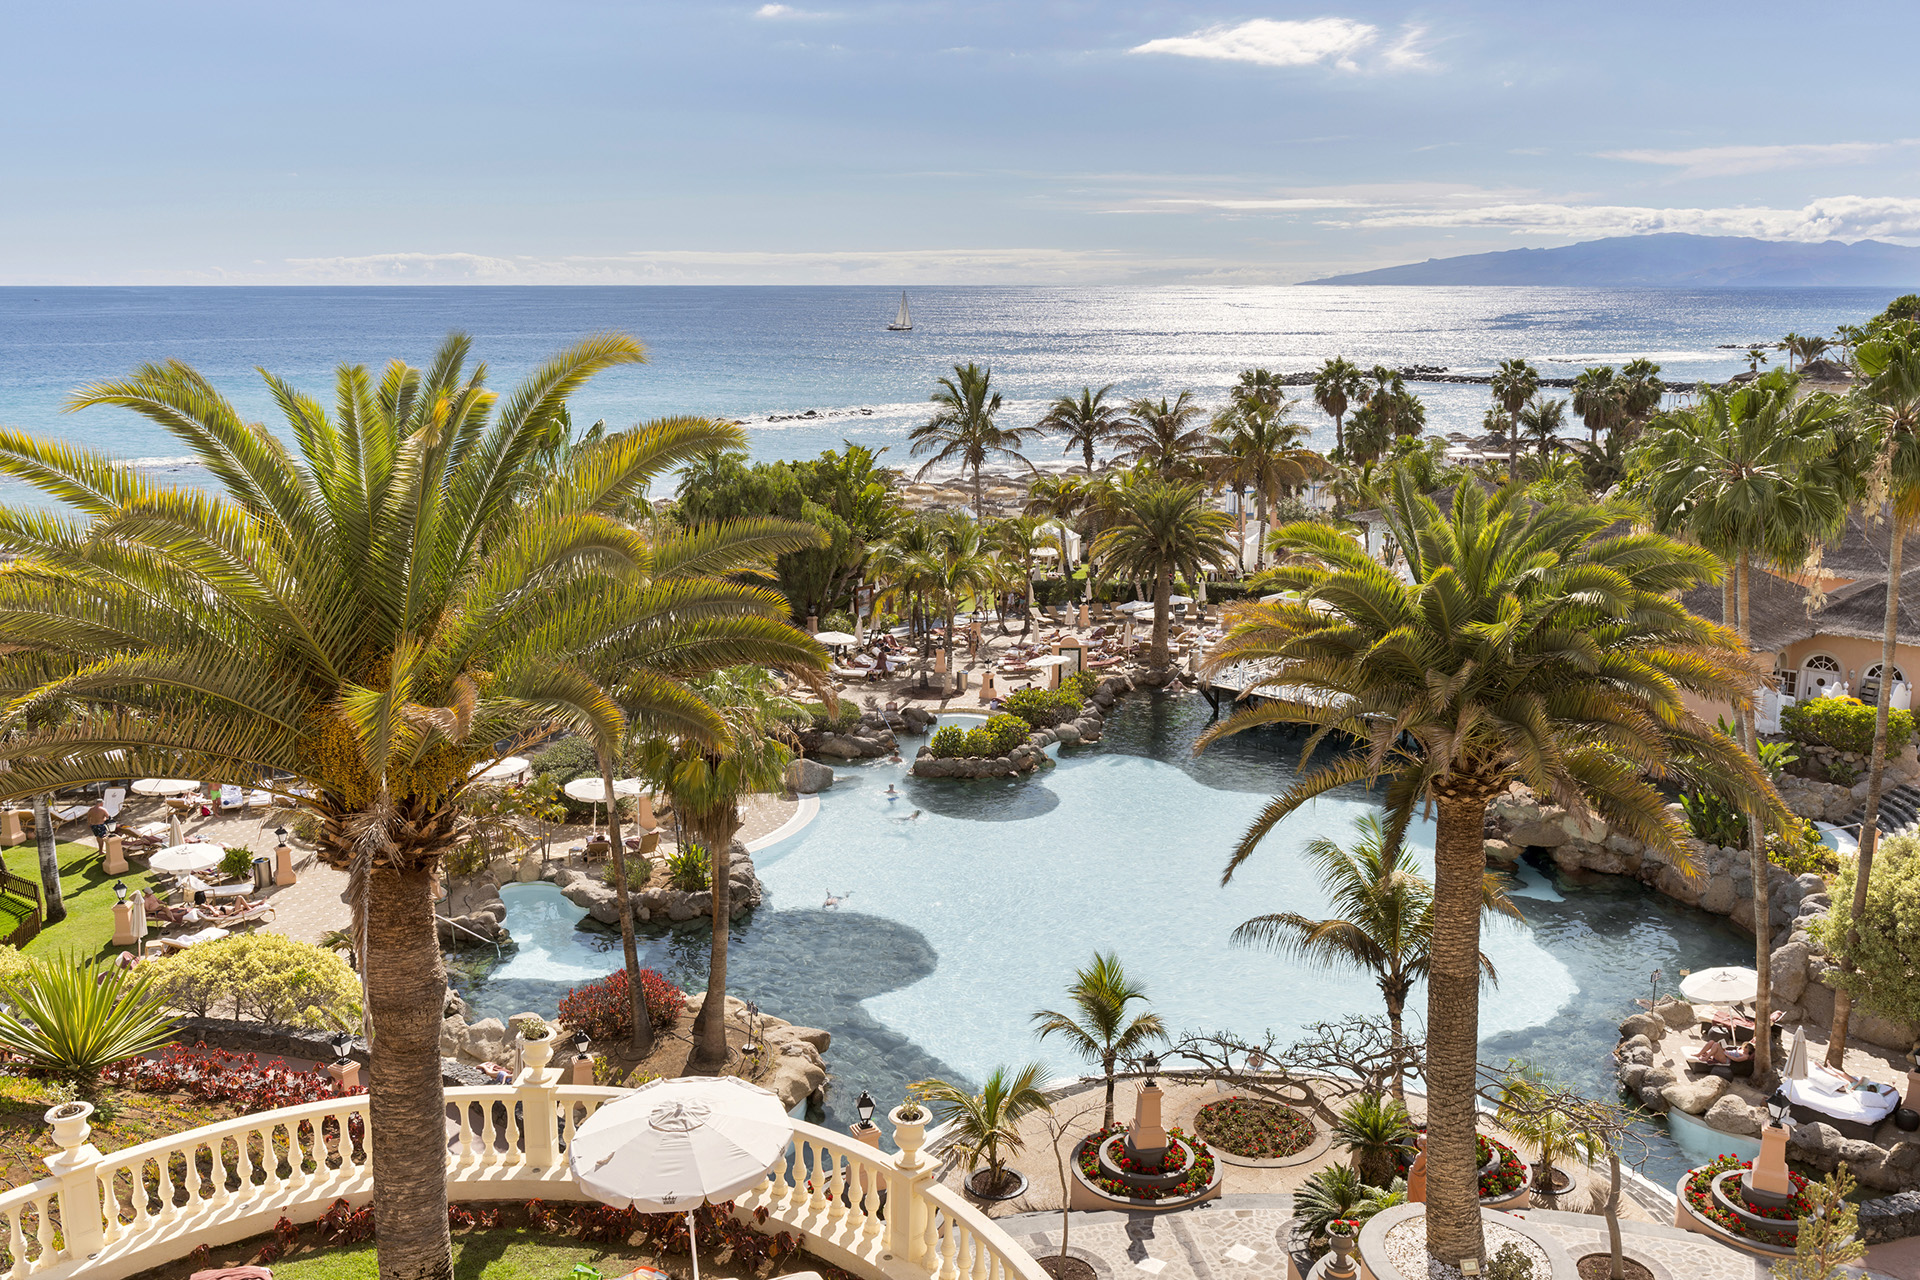 Old School Family Indulgence: Bahía del Duque, Tenerife – Hotel Review